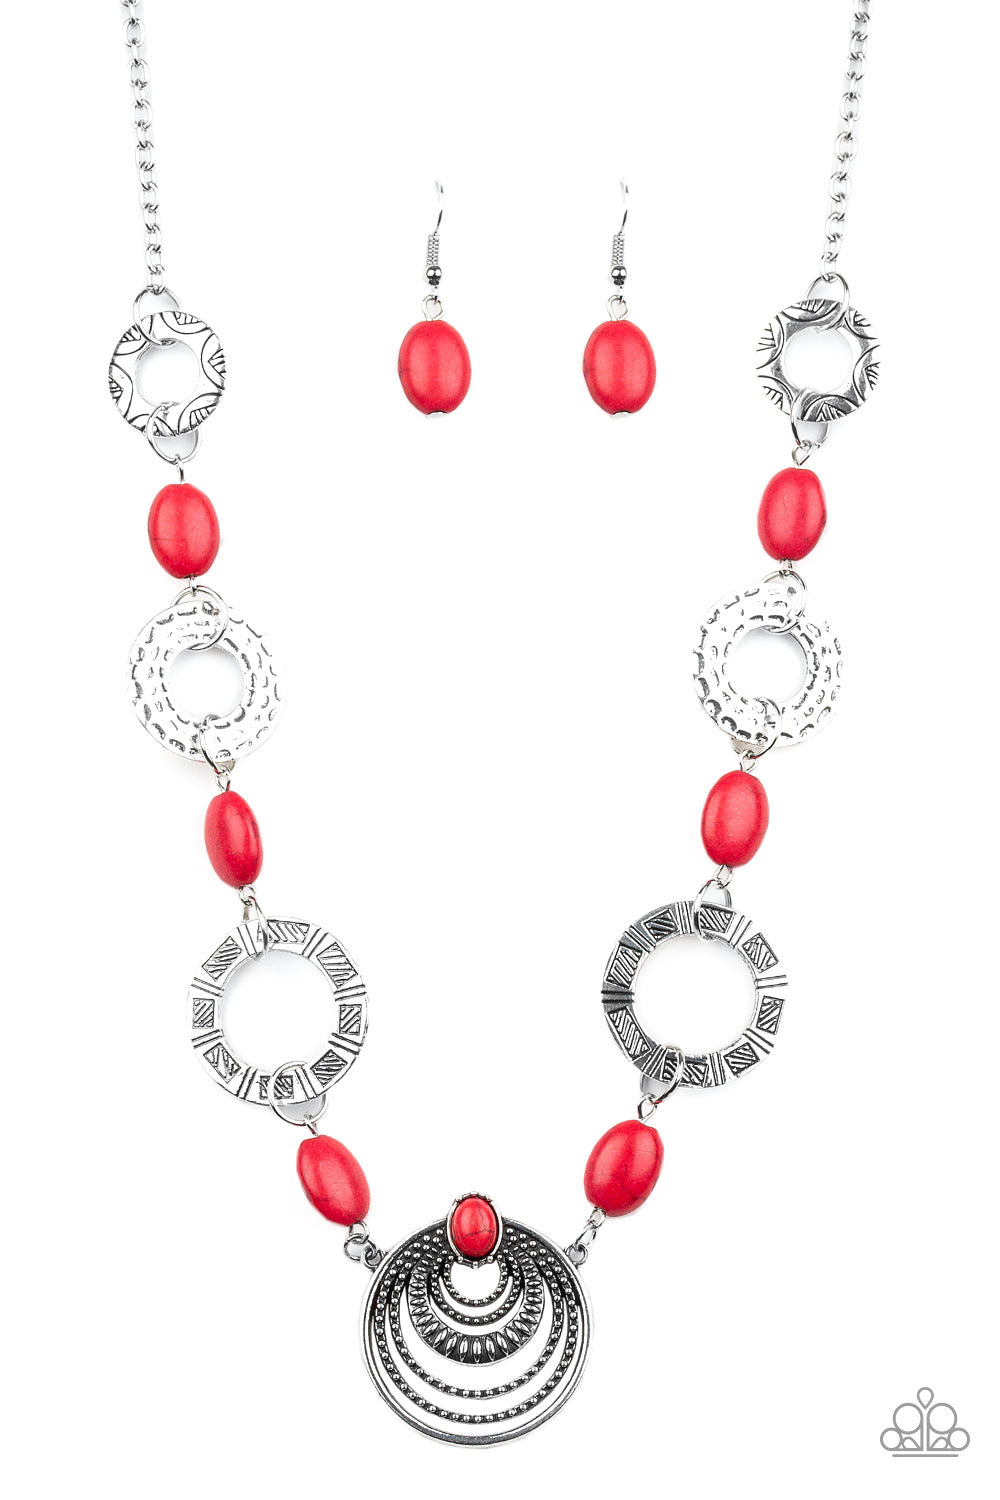 Hammered, stamped, and studded in tribal inspired patterns, a collection of ornate silver discs link with fiery red stones below the collar for a colorful flair. Features an adjustable clasp closure.  Sold as one individu